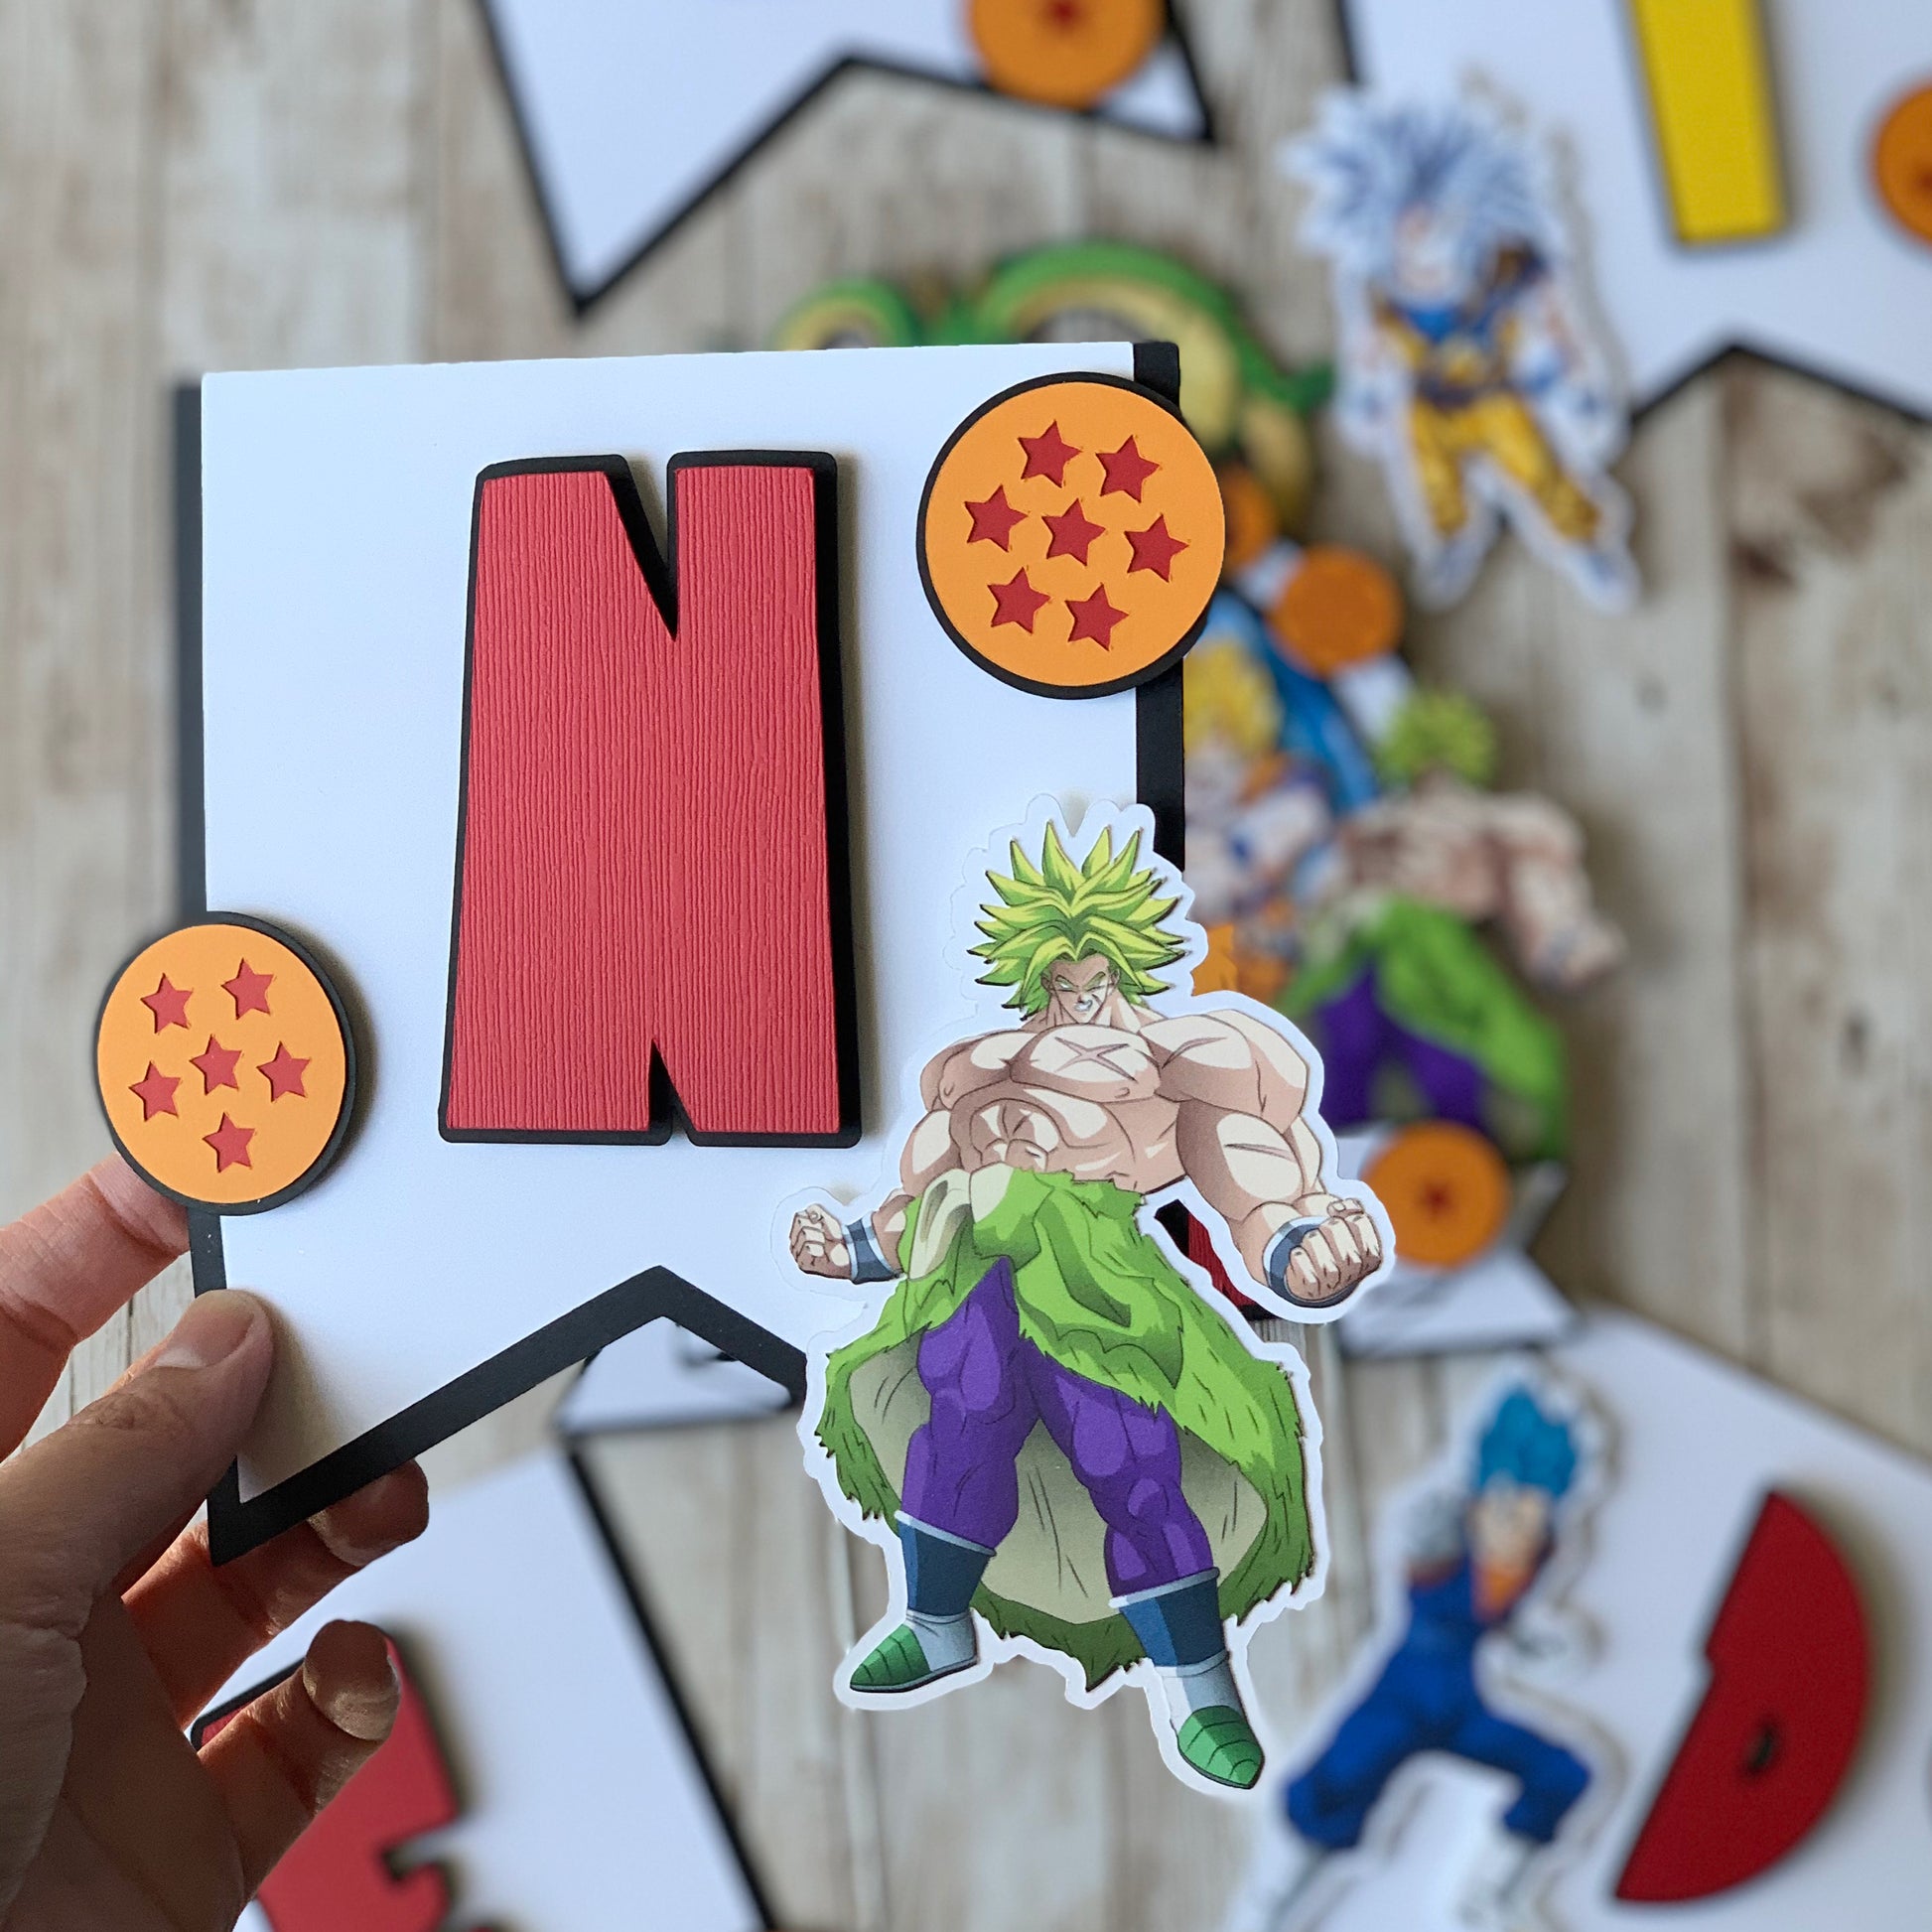 Dragon Ball Z themed party decorations – Dae2Dae Events